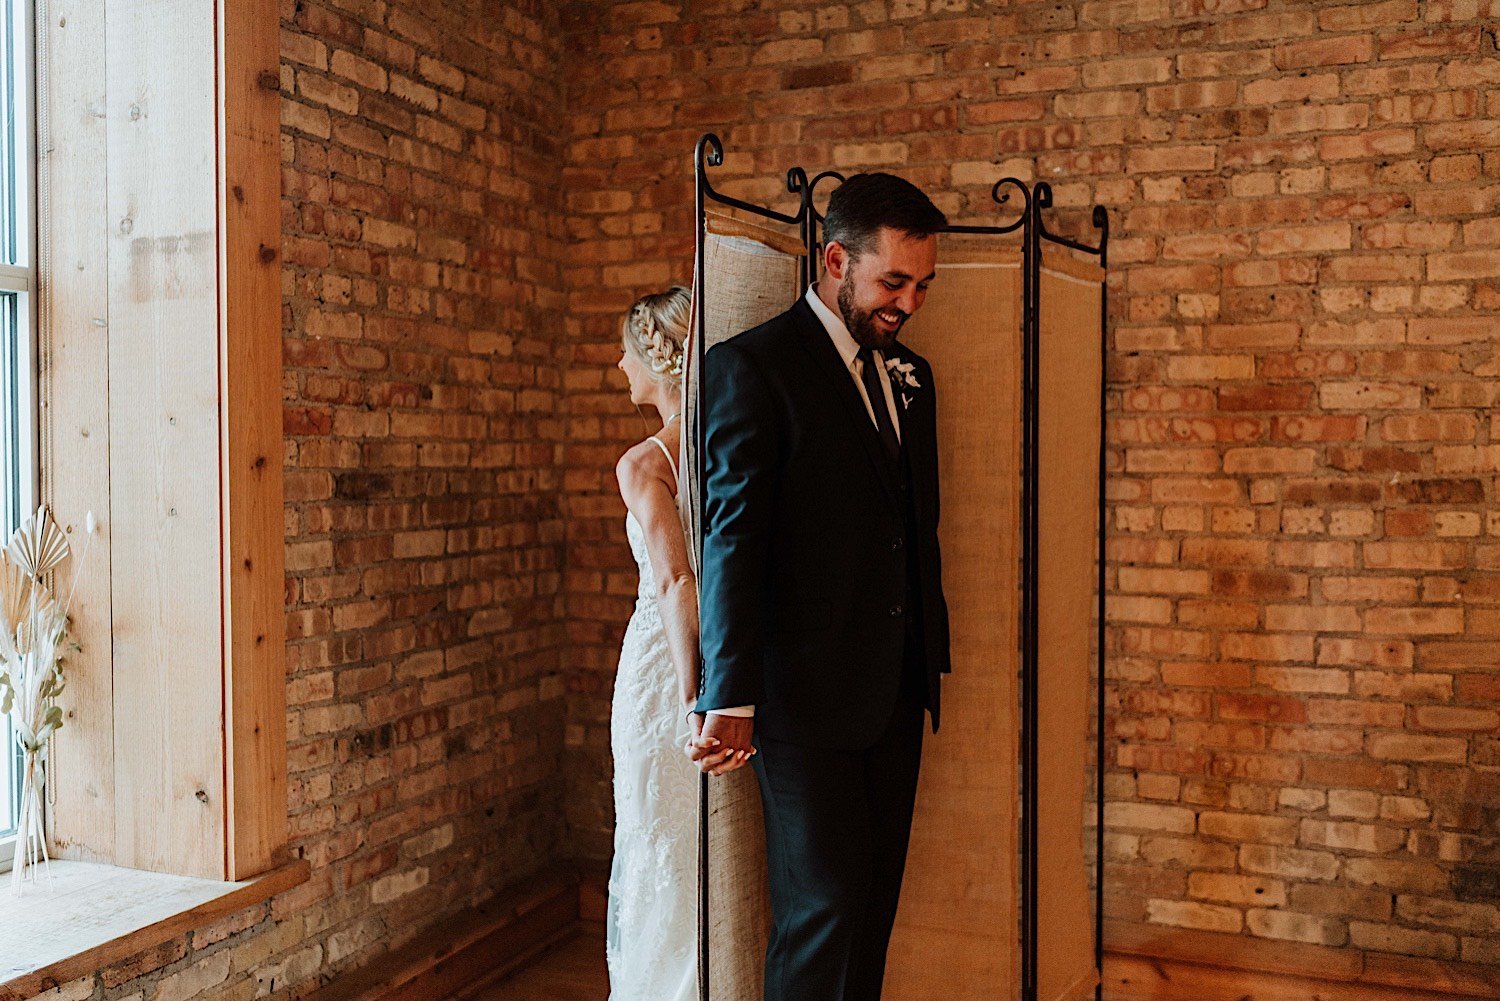 Bride and groom share first touch with a divider between them and a brick wall background